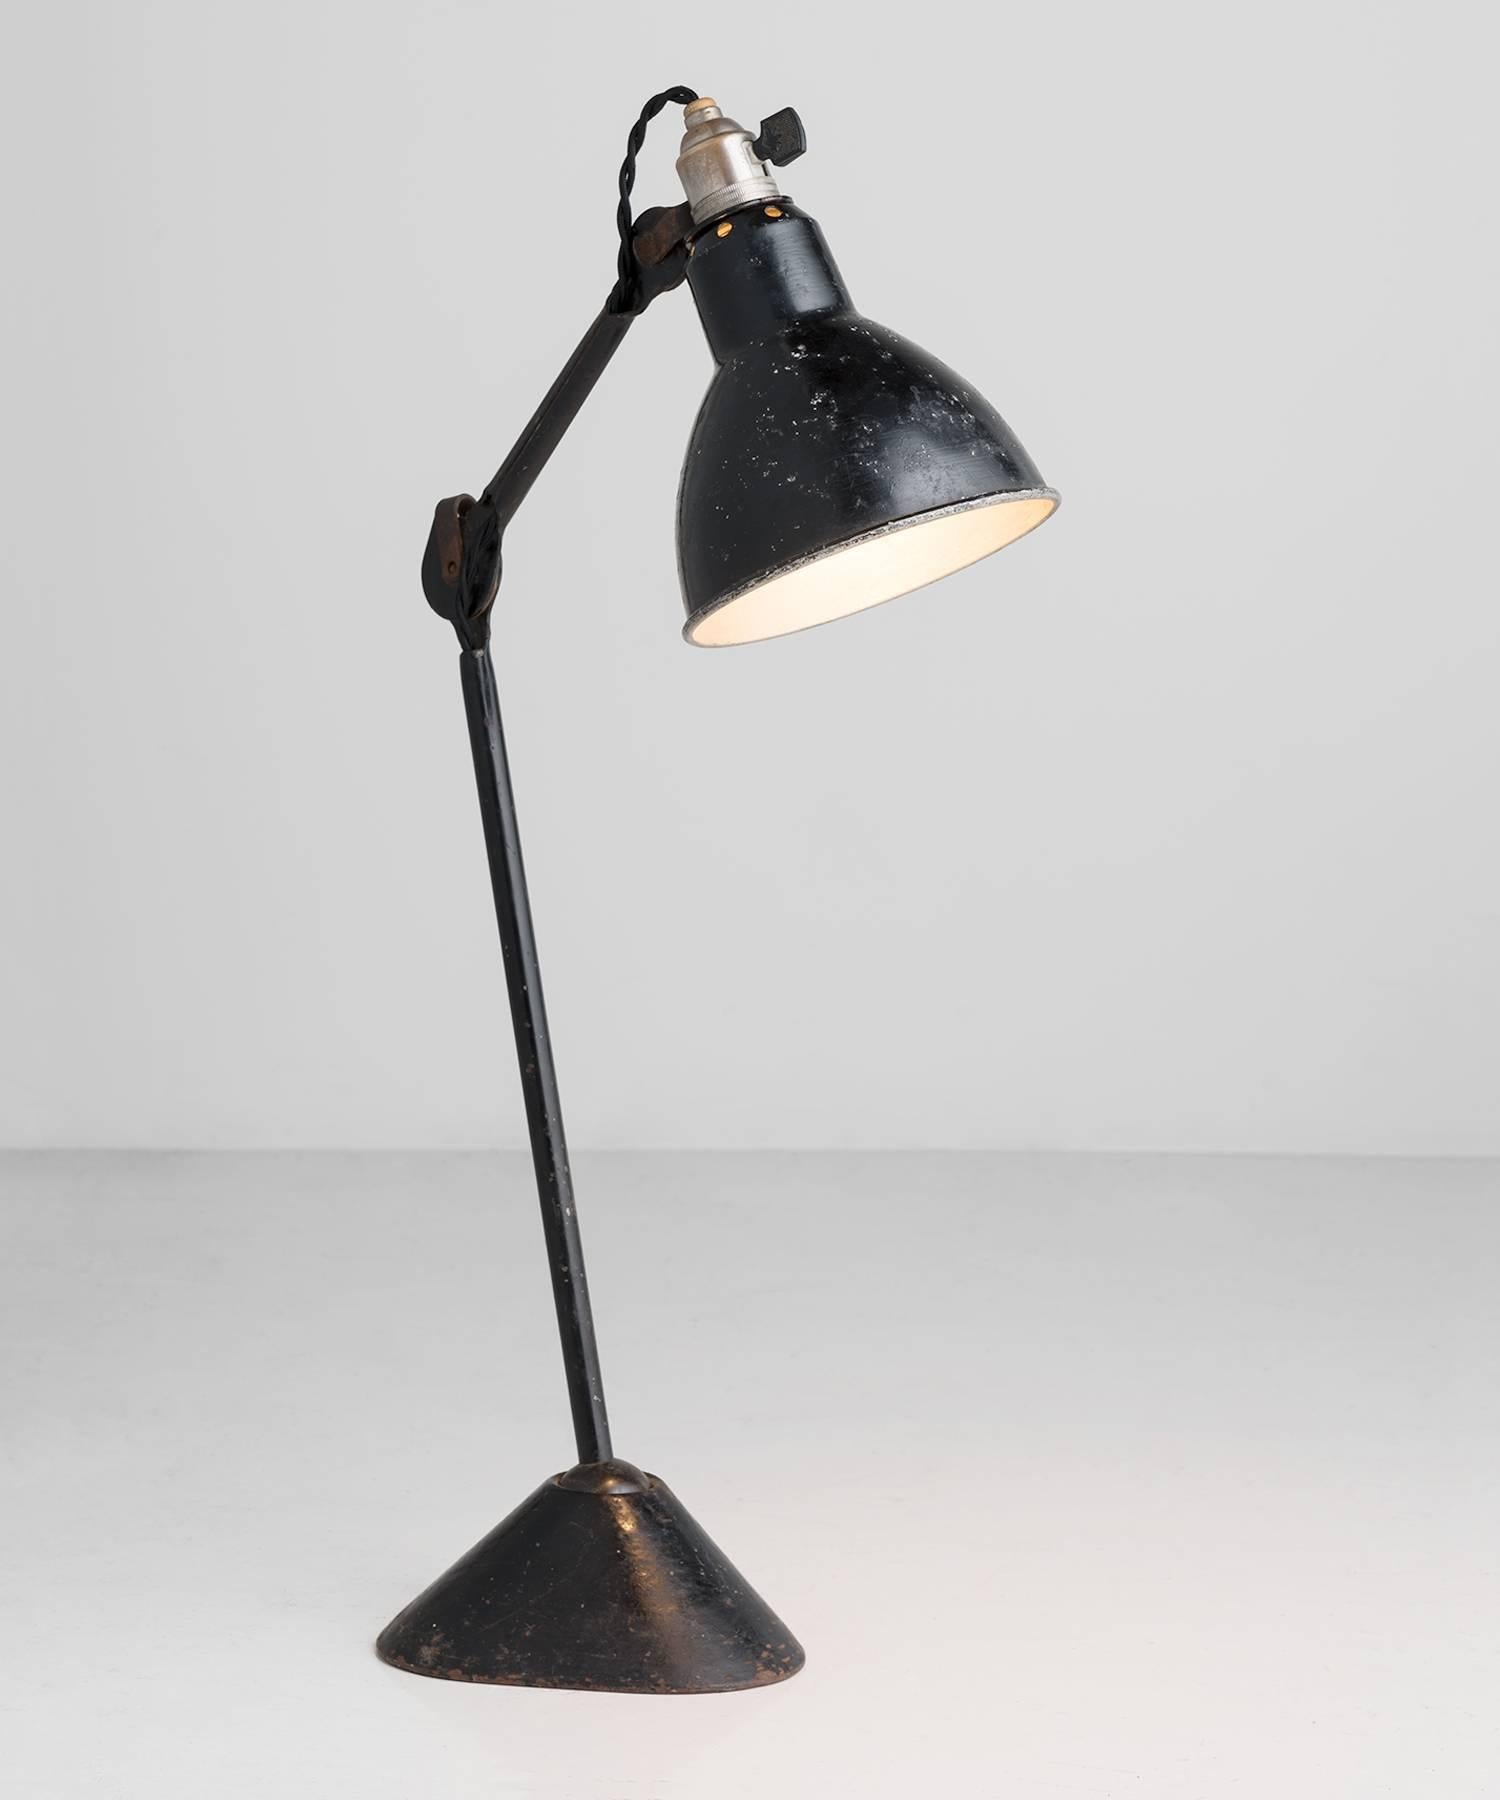 Gras lamp no. 205, circa 1930.

Iconic design by Bernard-Albin Gras features a cast steel frame with three points of adjustment.